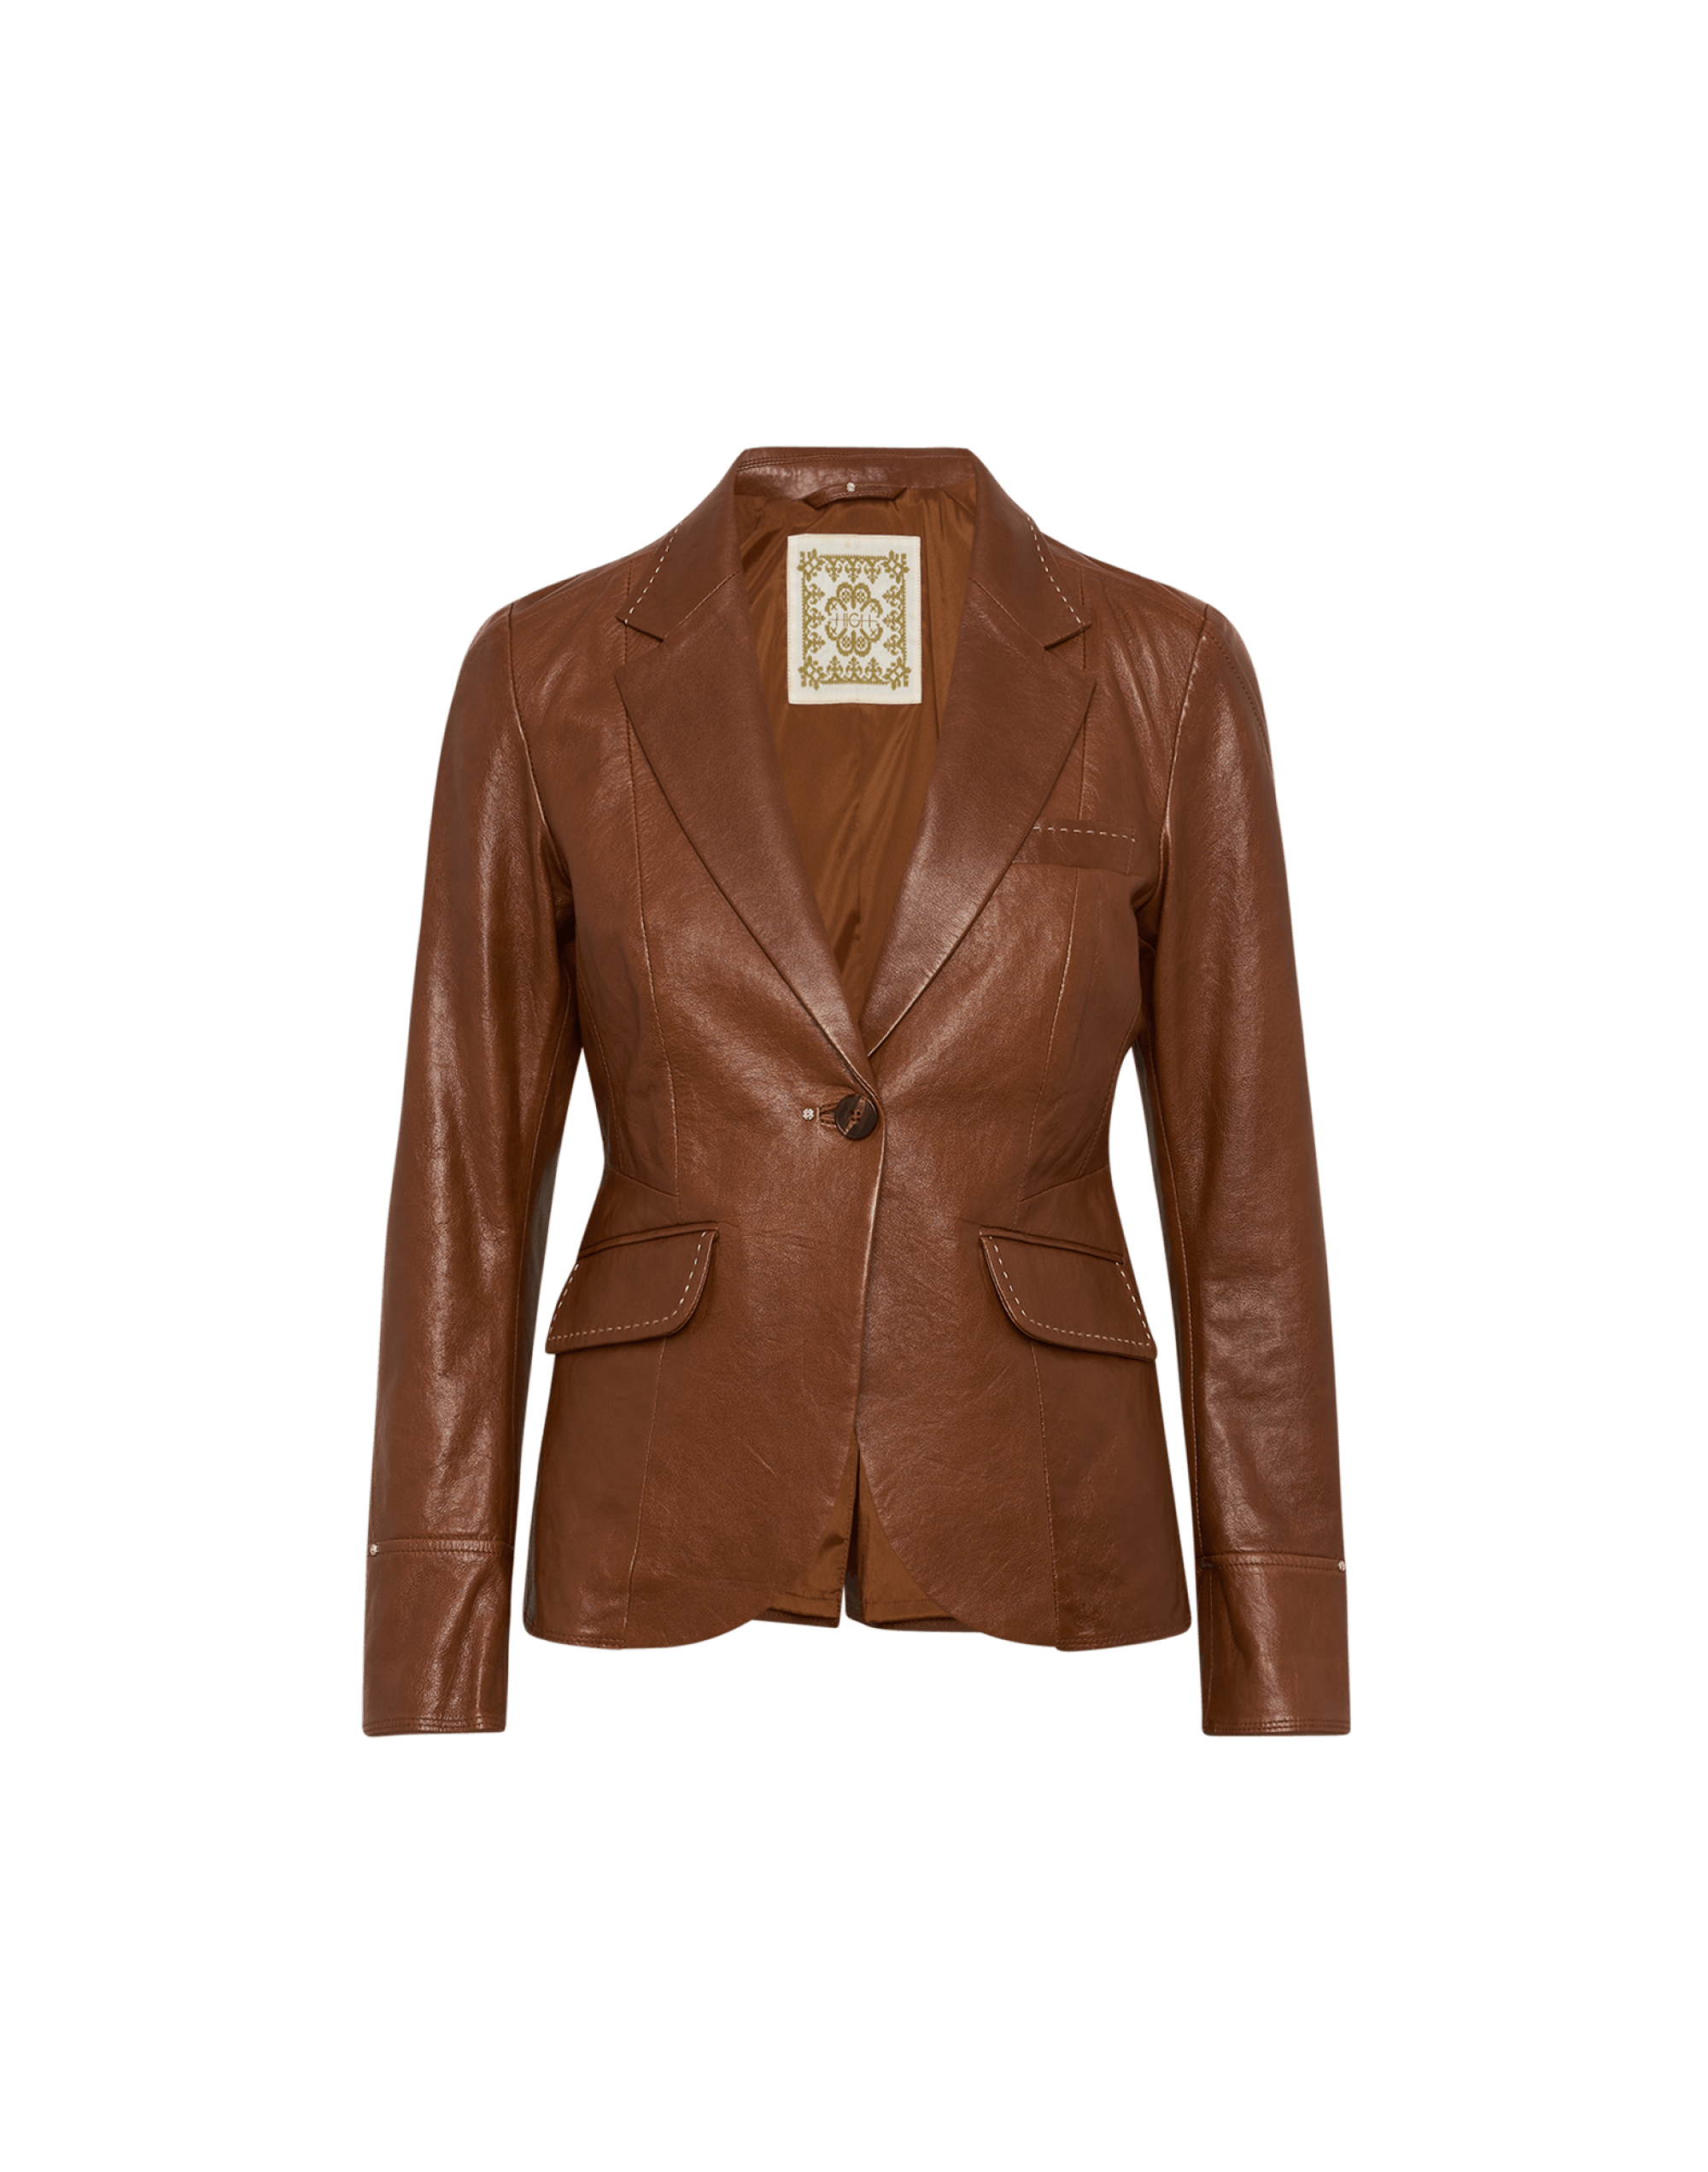 APPRAISE: Fitted jacket in dark tan leather